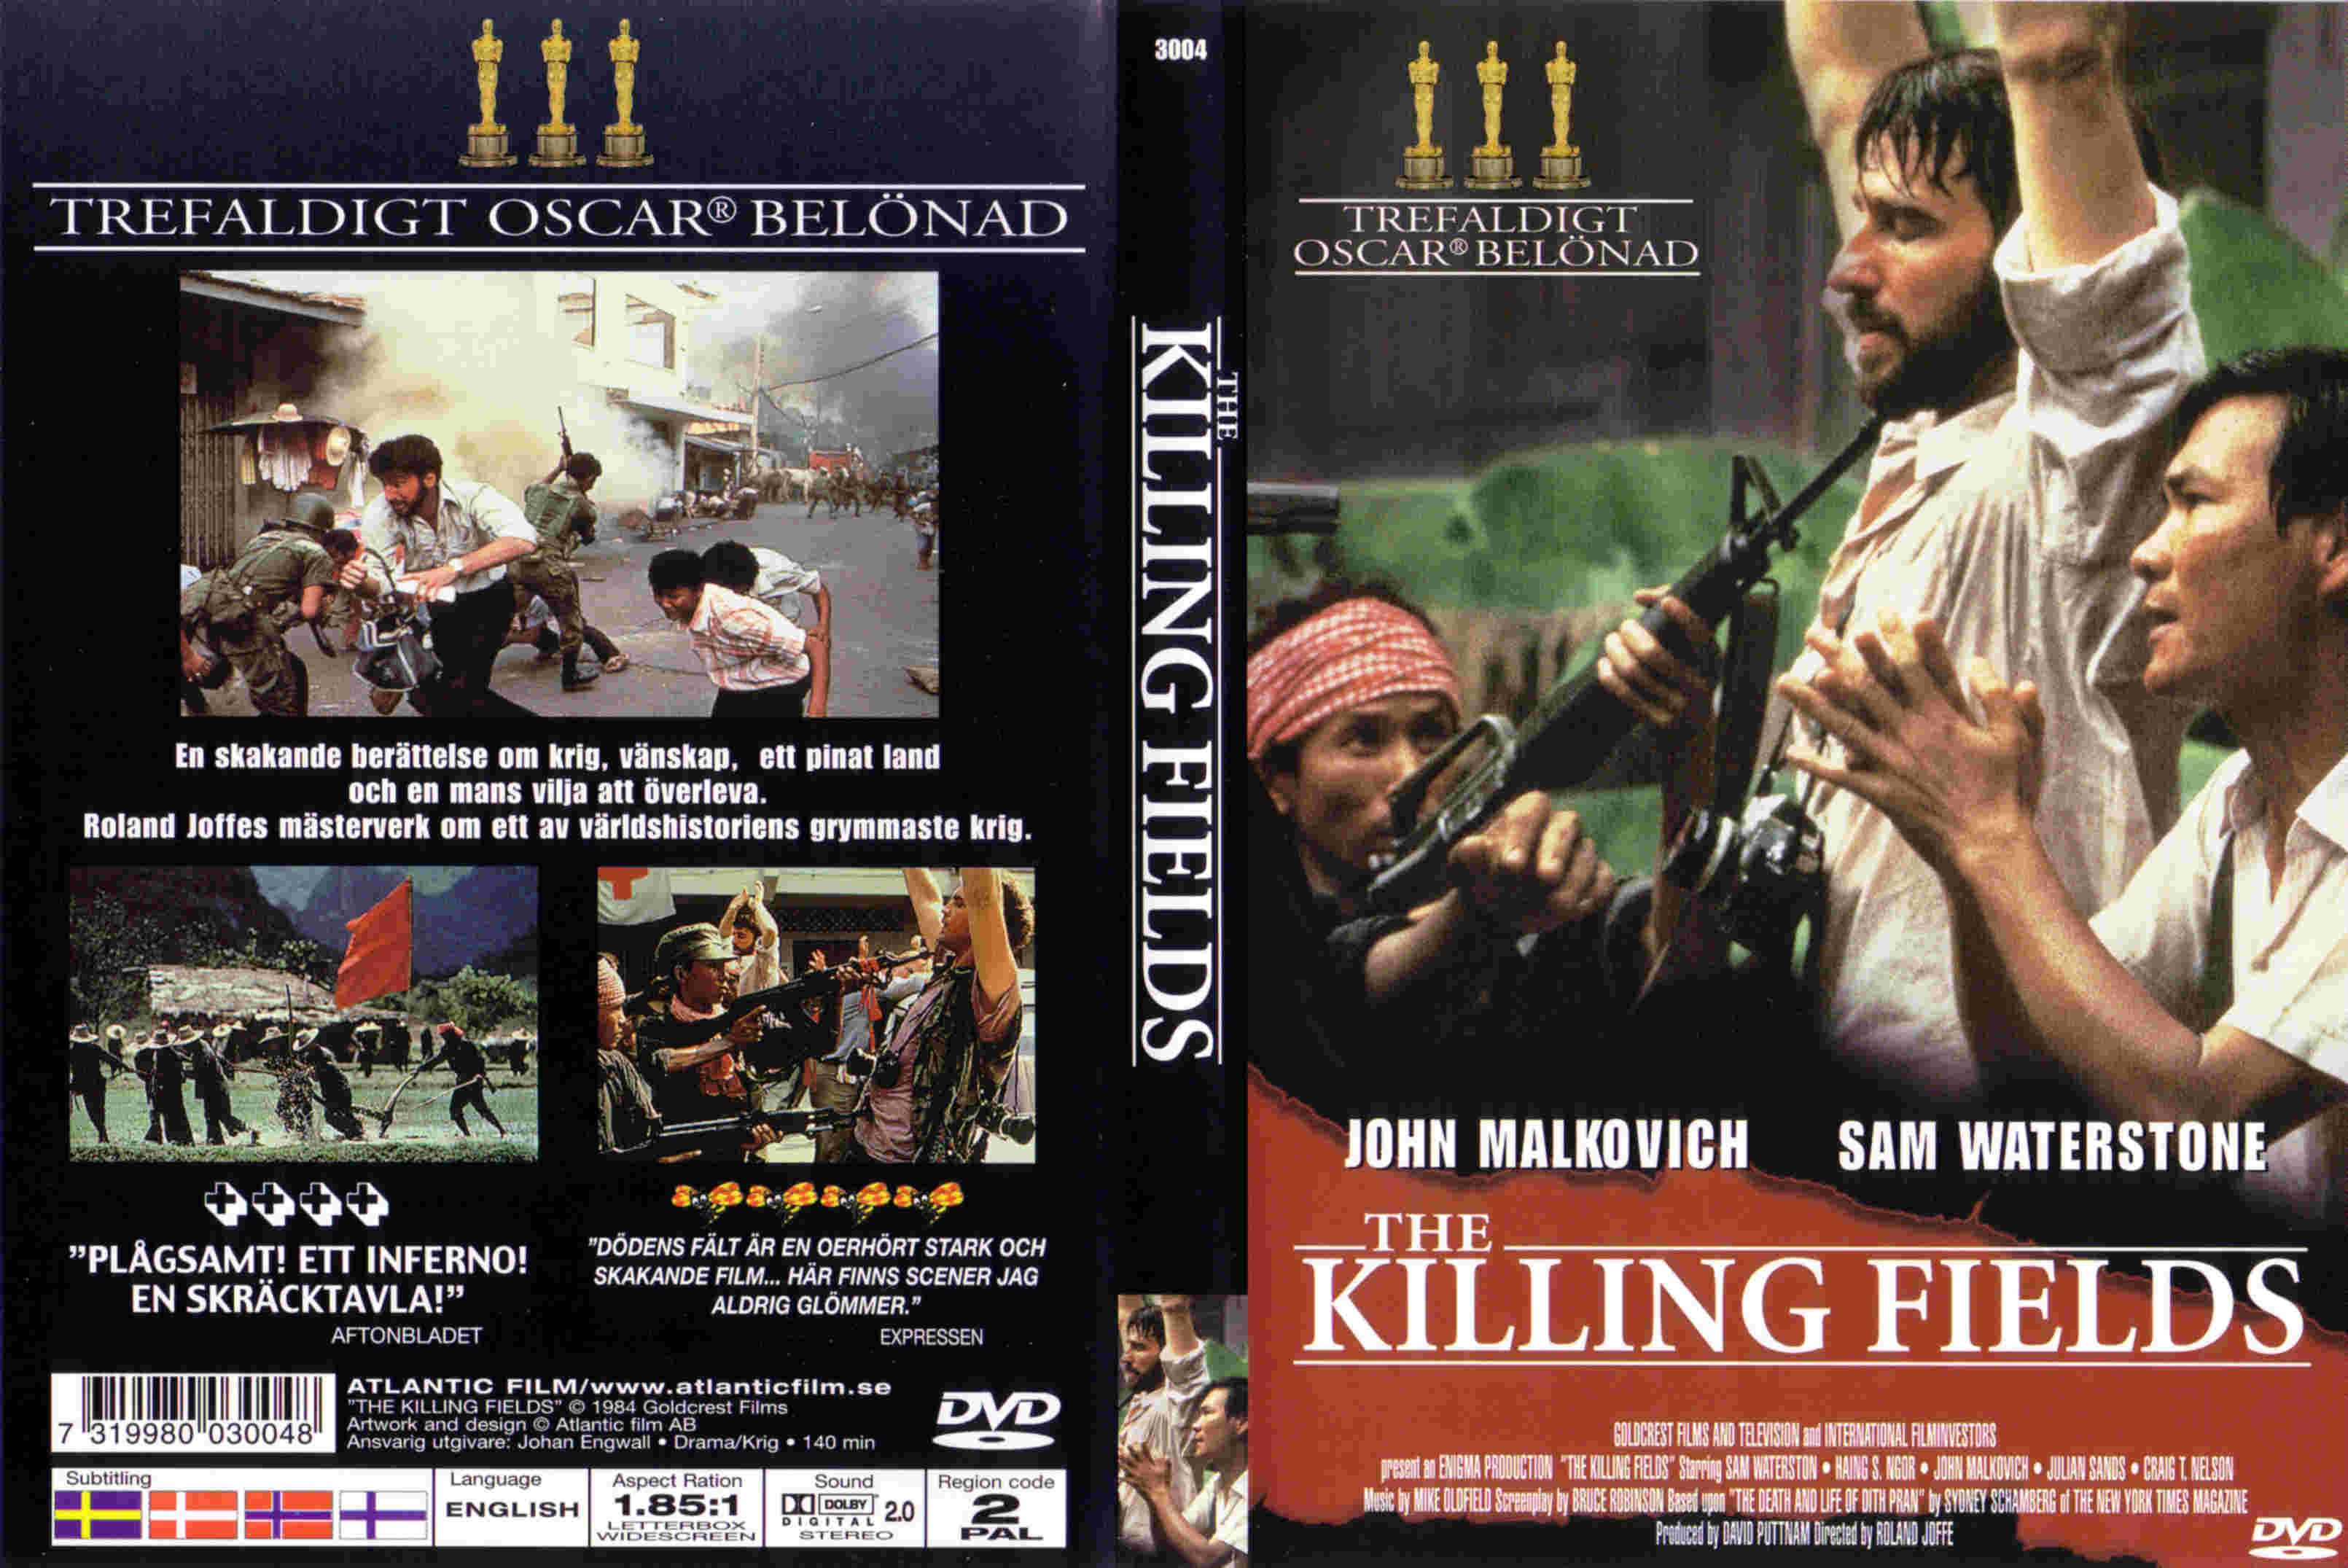 alabanza Contracción Abrumador The Killing Fields Goldcrest DVD - Mike Oldfield Worldwide Discography